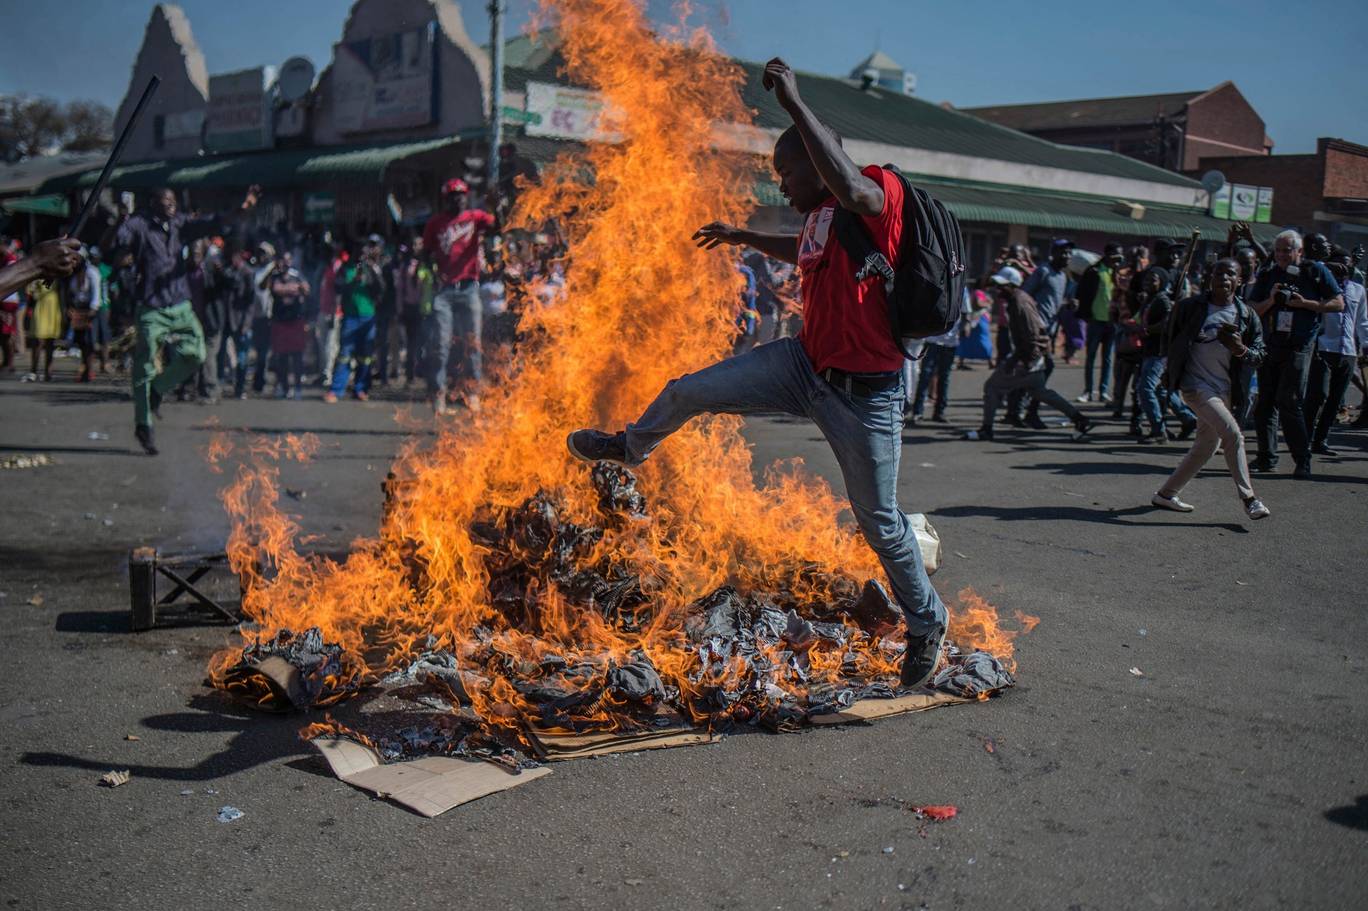 Opposition MDC party supporters protest in the streets of Harare during clashes with police AP